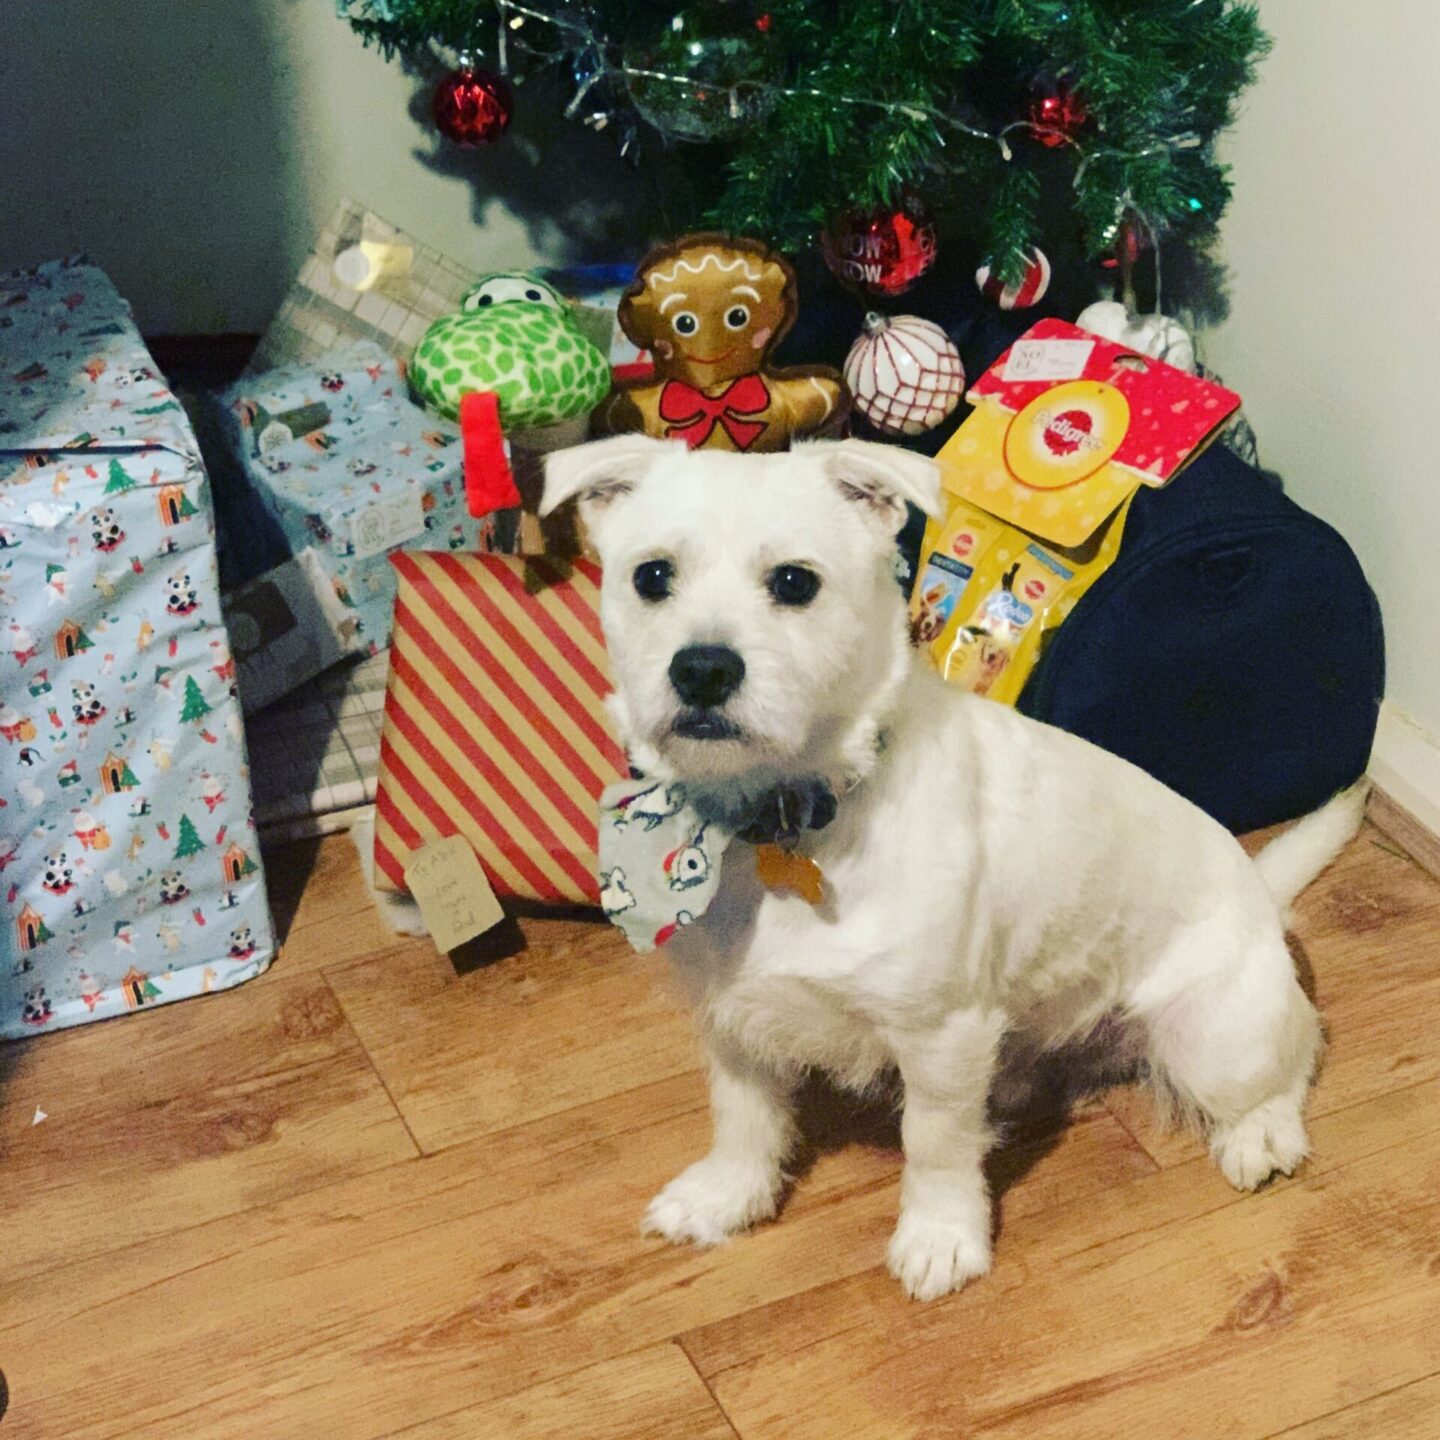 westie dog sitting next to a pile of dog toys and treats